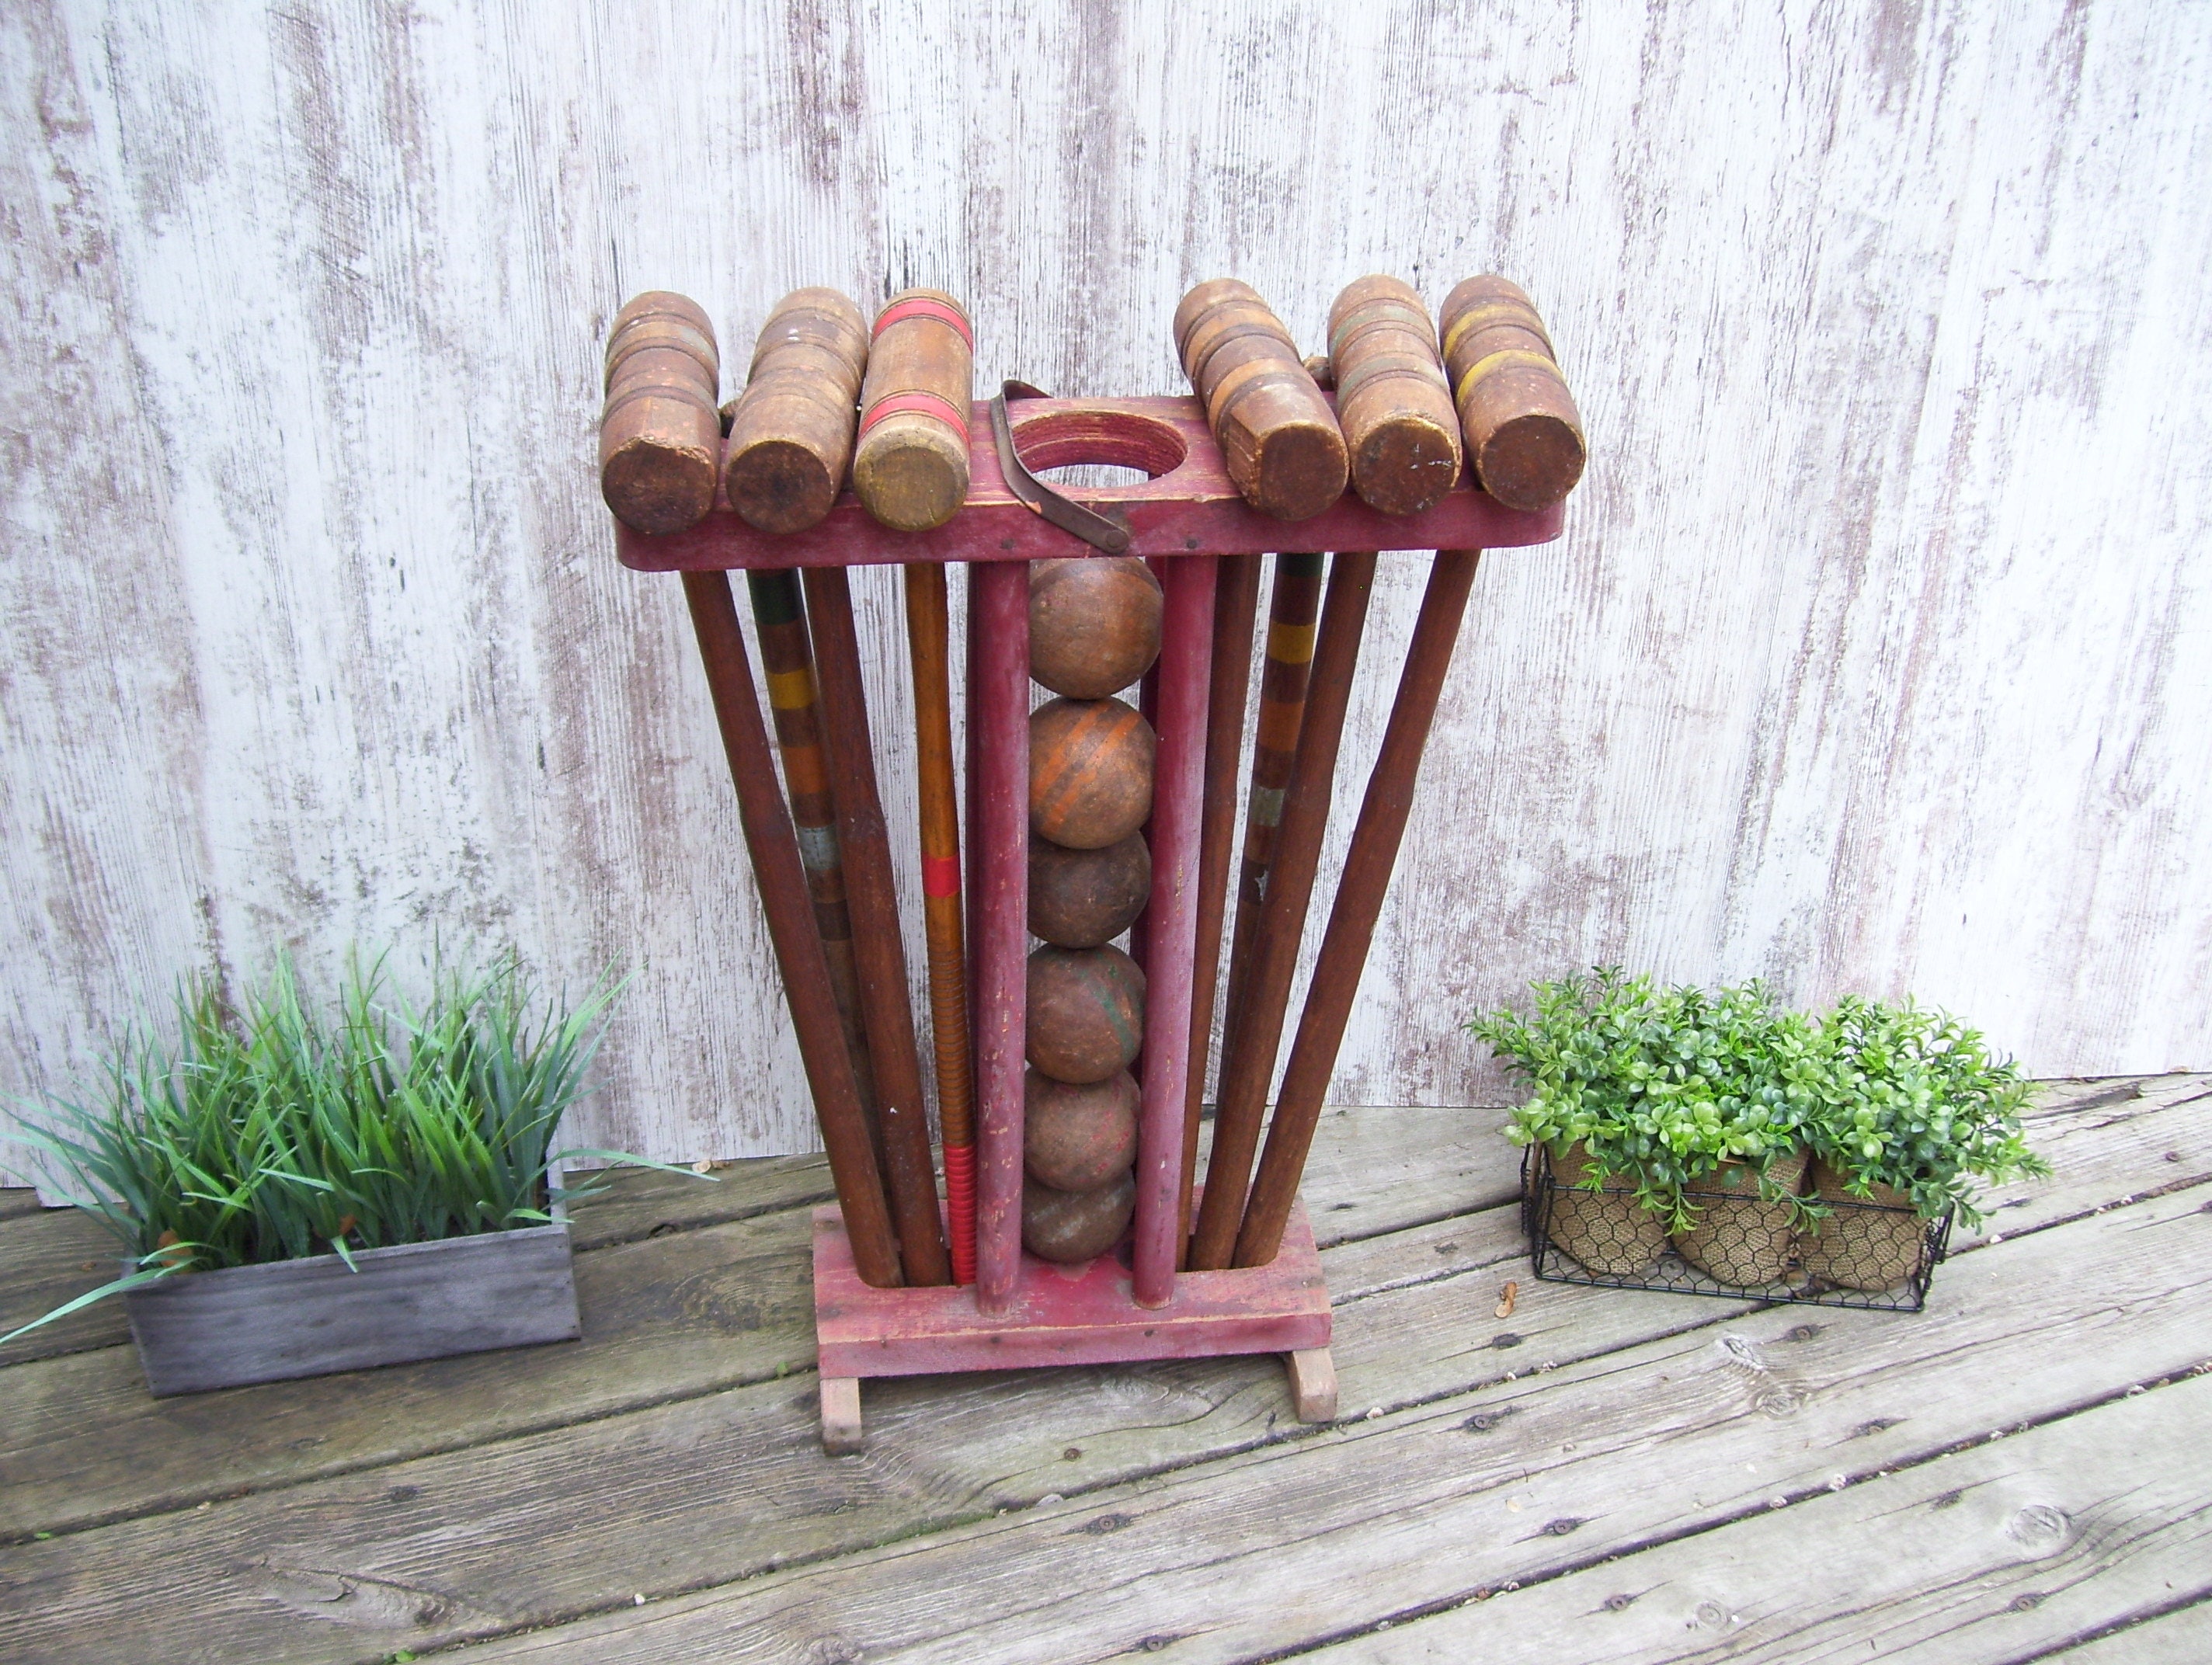 CROQUET 4 Players Set Complete Wood With Carry Bag Antique Lawn Pack Free Post 